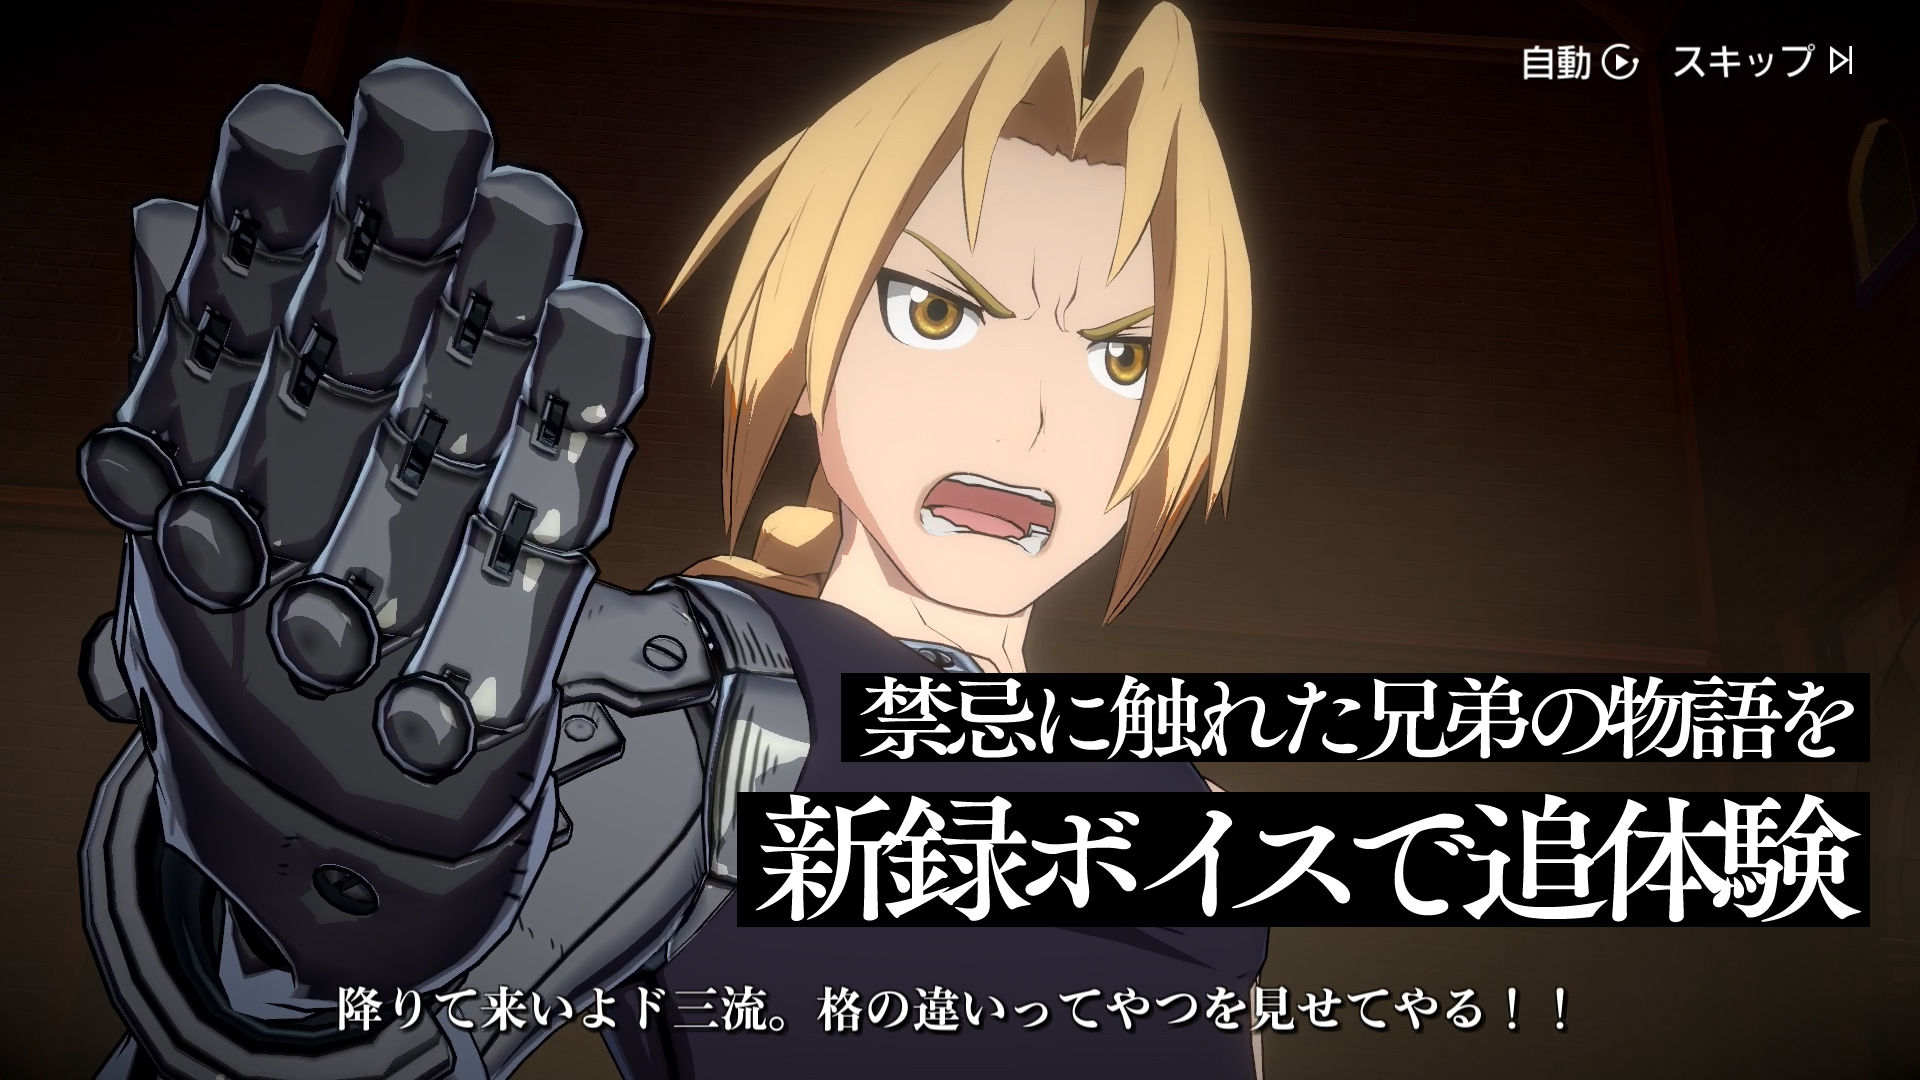 Screenshot of Fullmetal Alchemist Mobile (Only Available in JP)